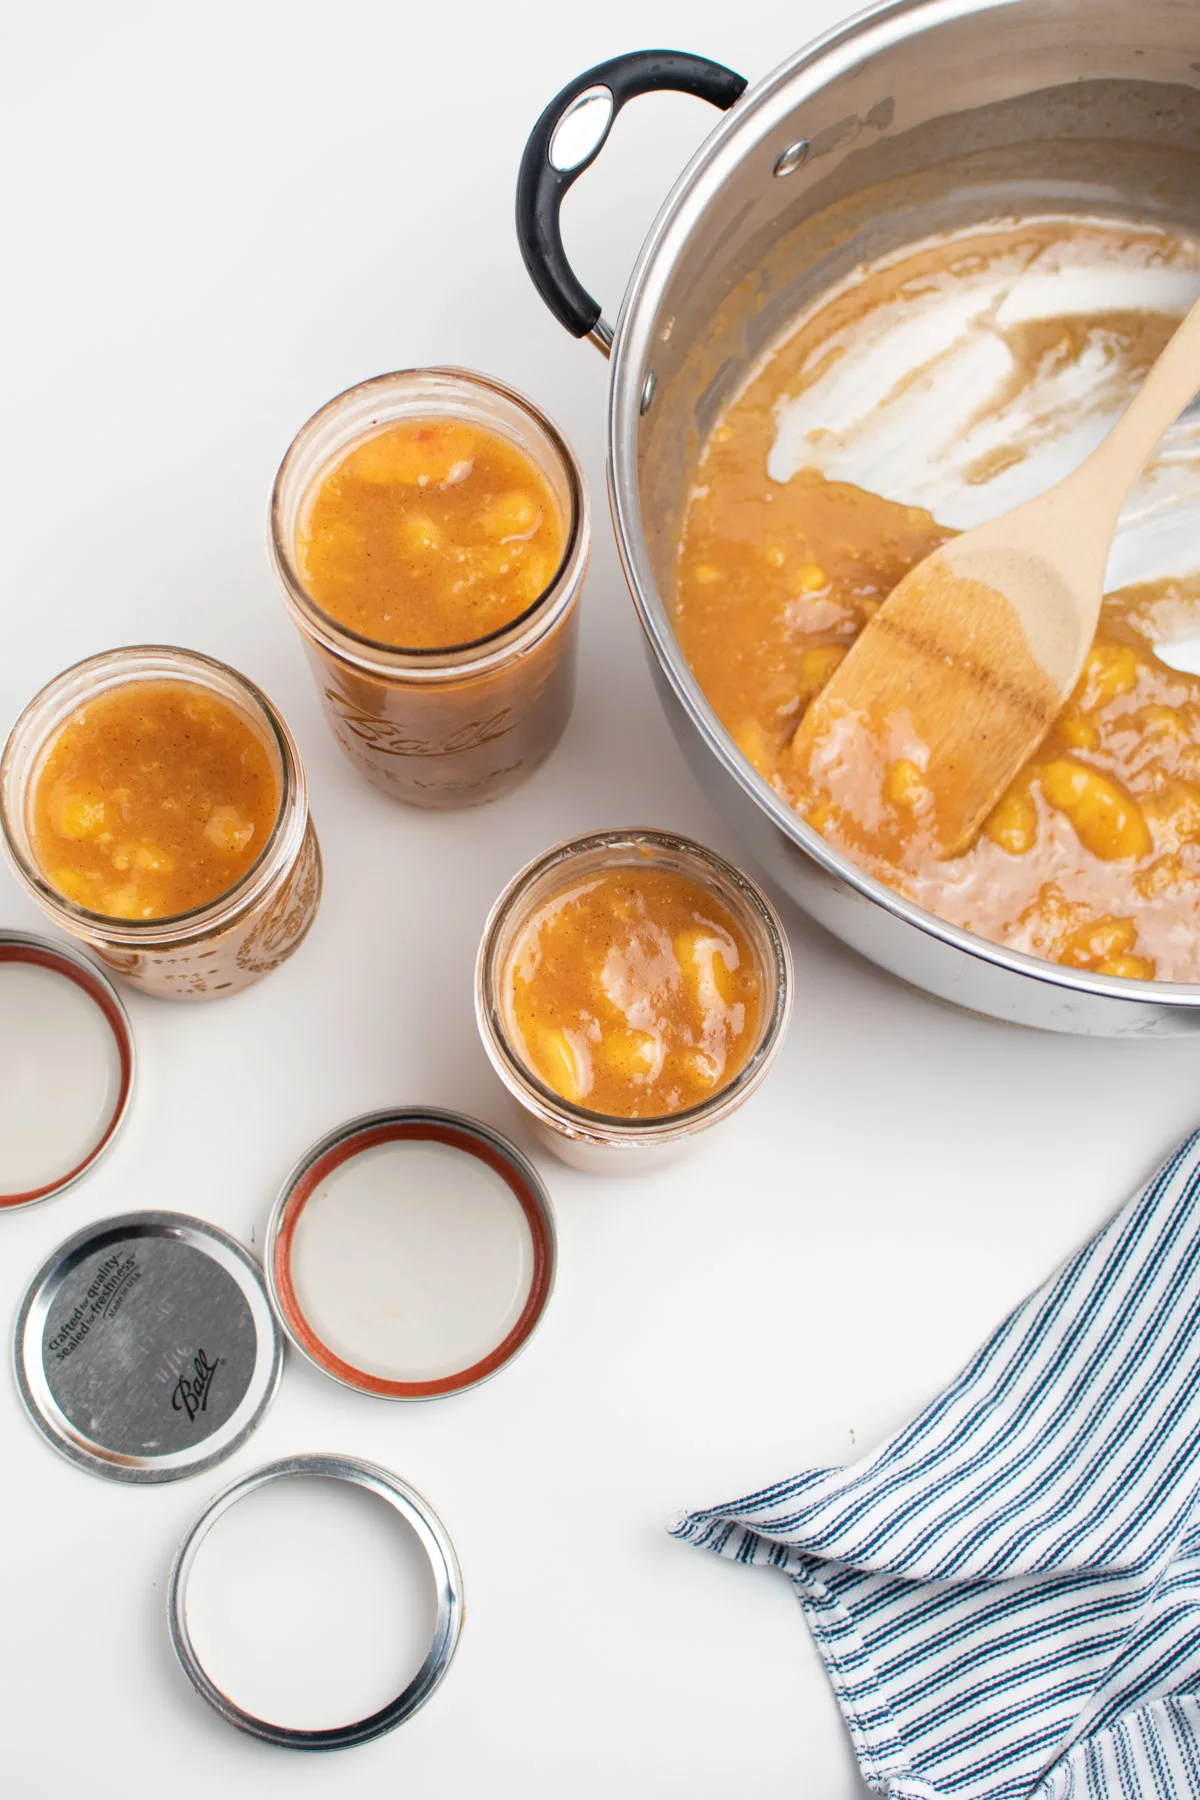 Three jars full of peach pie filling surrounded by jar lids, towel, and pot of pie filling.